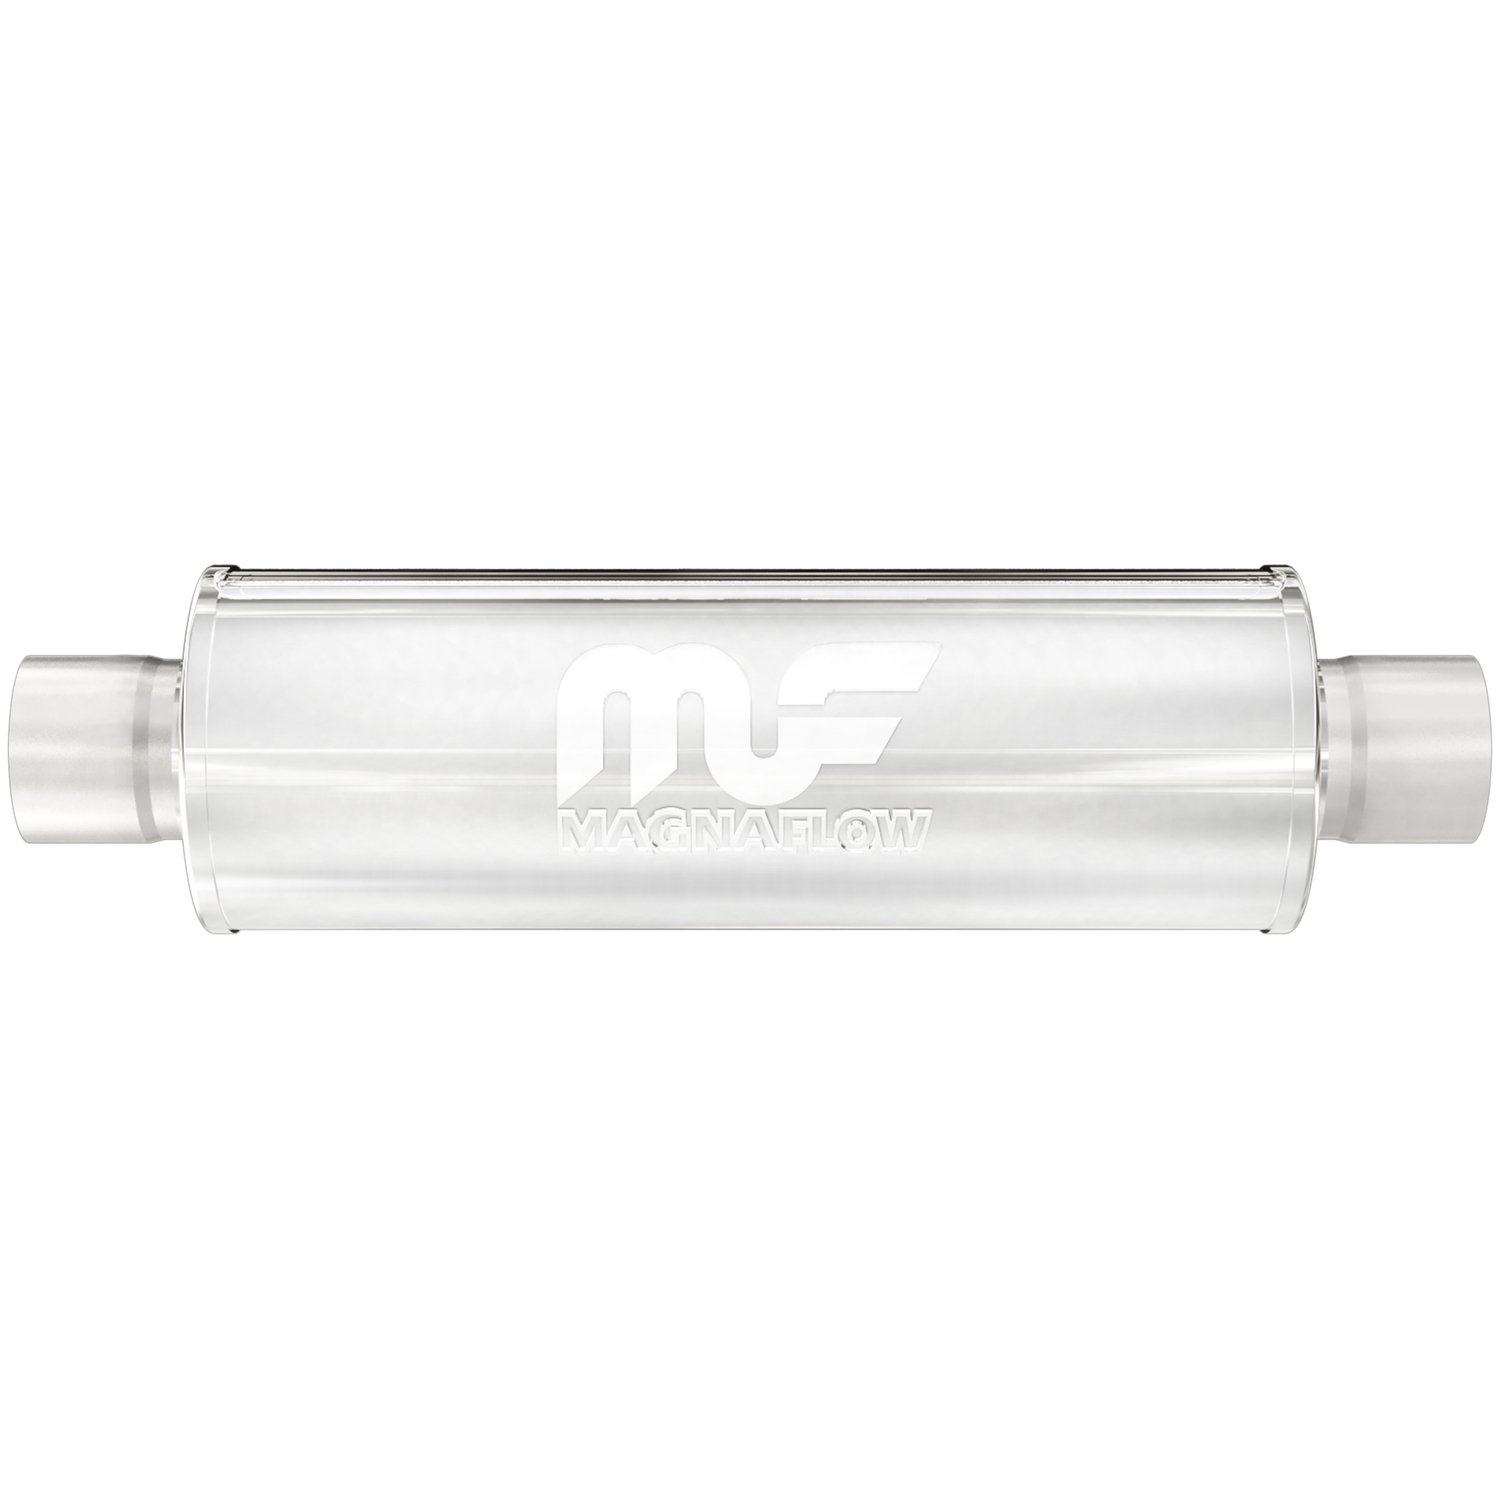 4" Round Muffler Center In/Center Out: 2.25" Body Length: 22" Overall Length: 28" Core Size: 2.5" Satin Finish